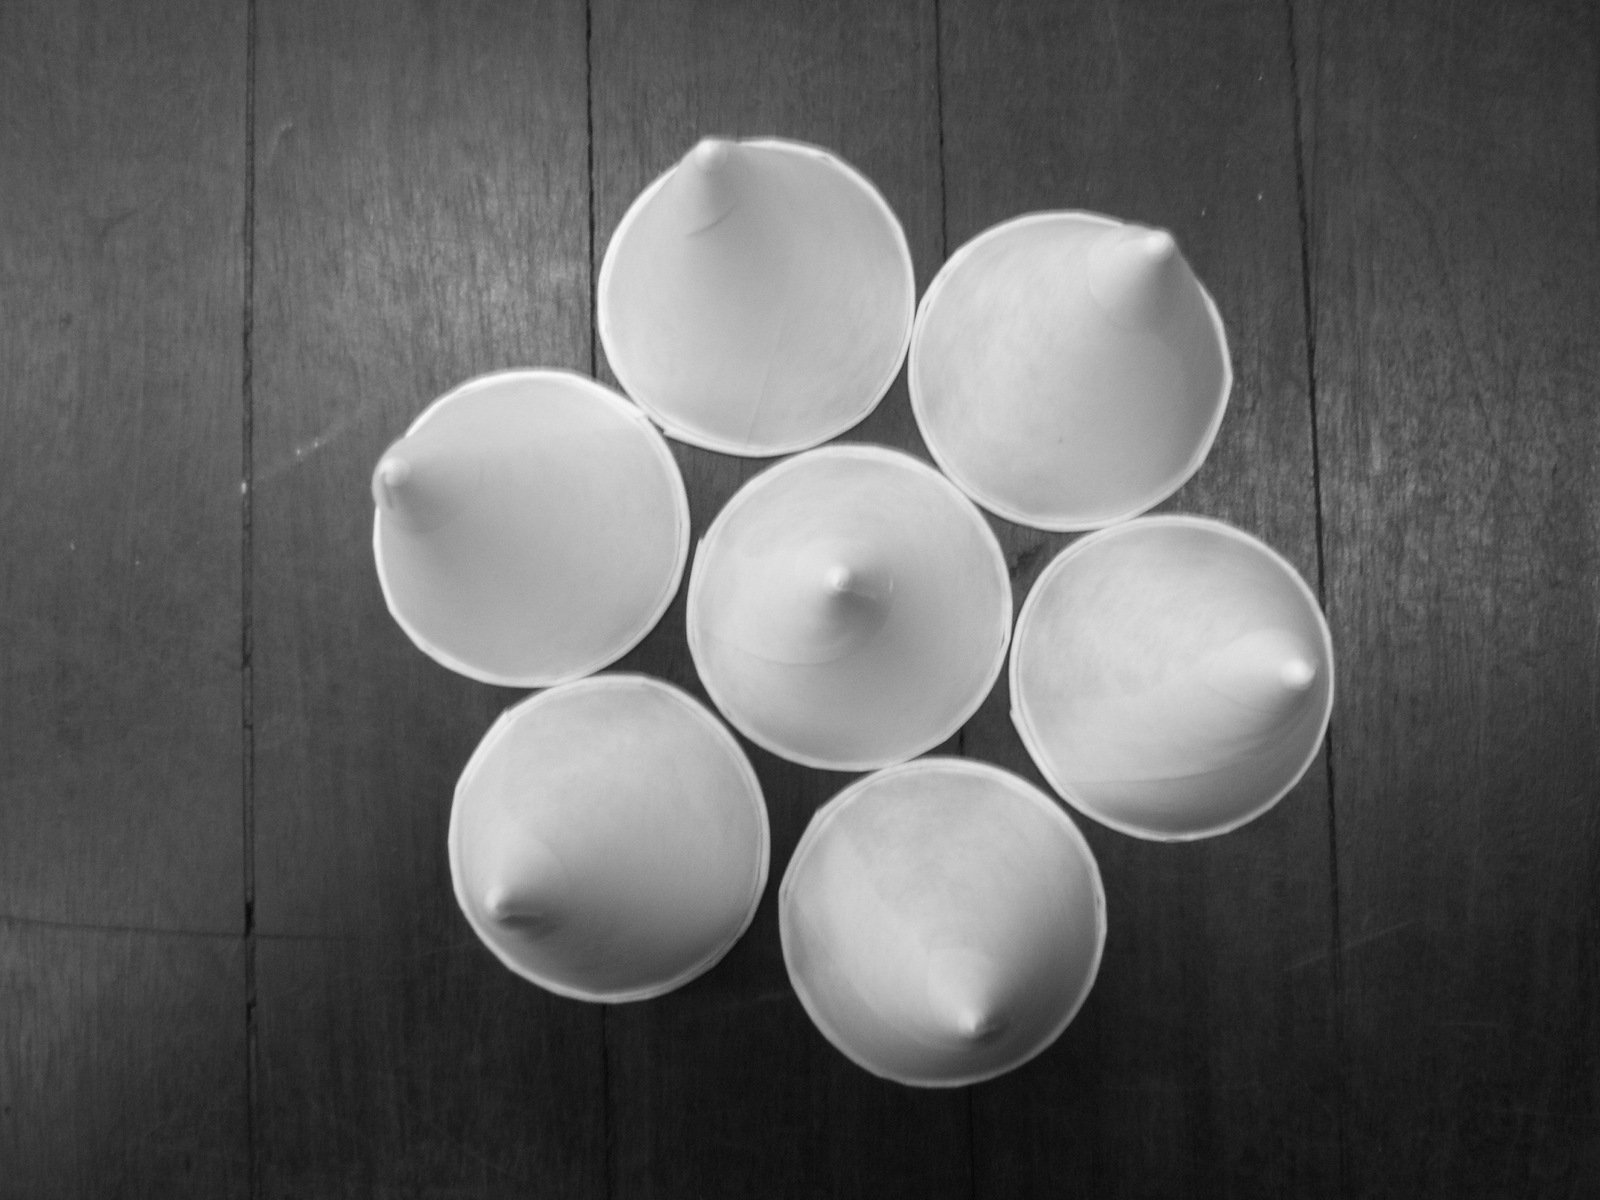 six empty bowls on a wooden surface